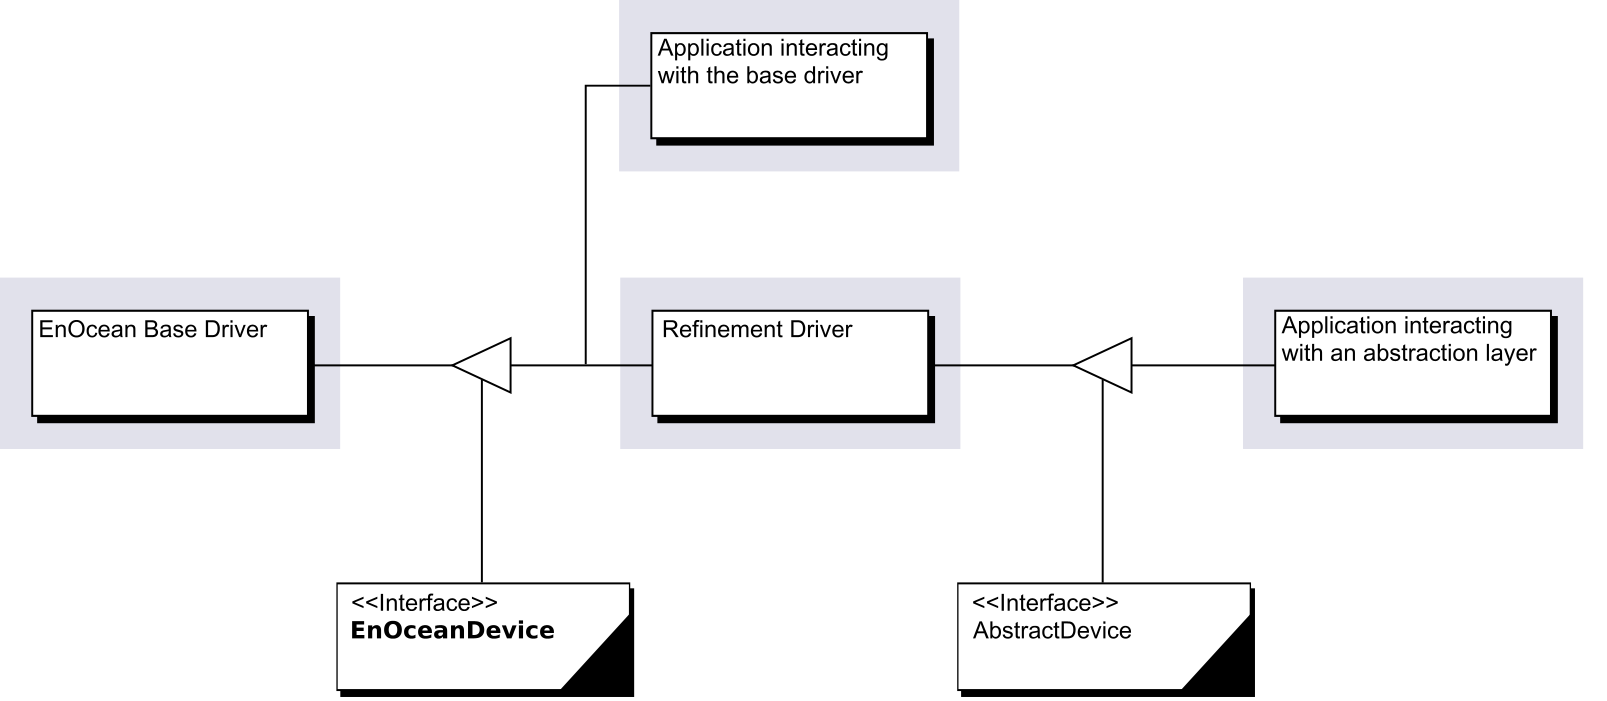 EnOcean Base Driver and a refinement driver representing devices in an abstract model.